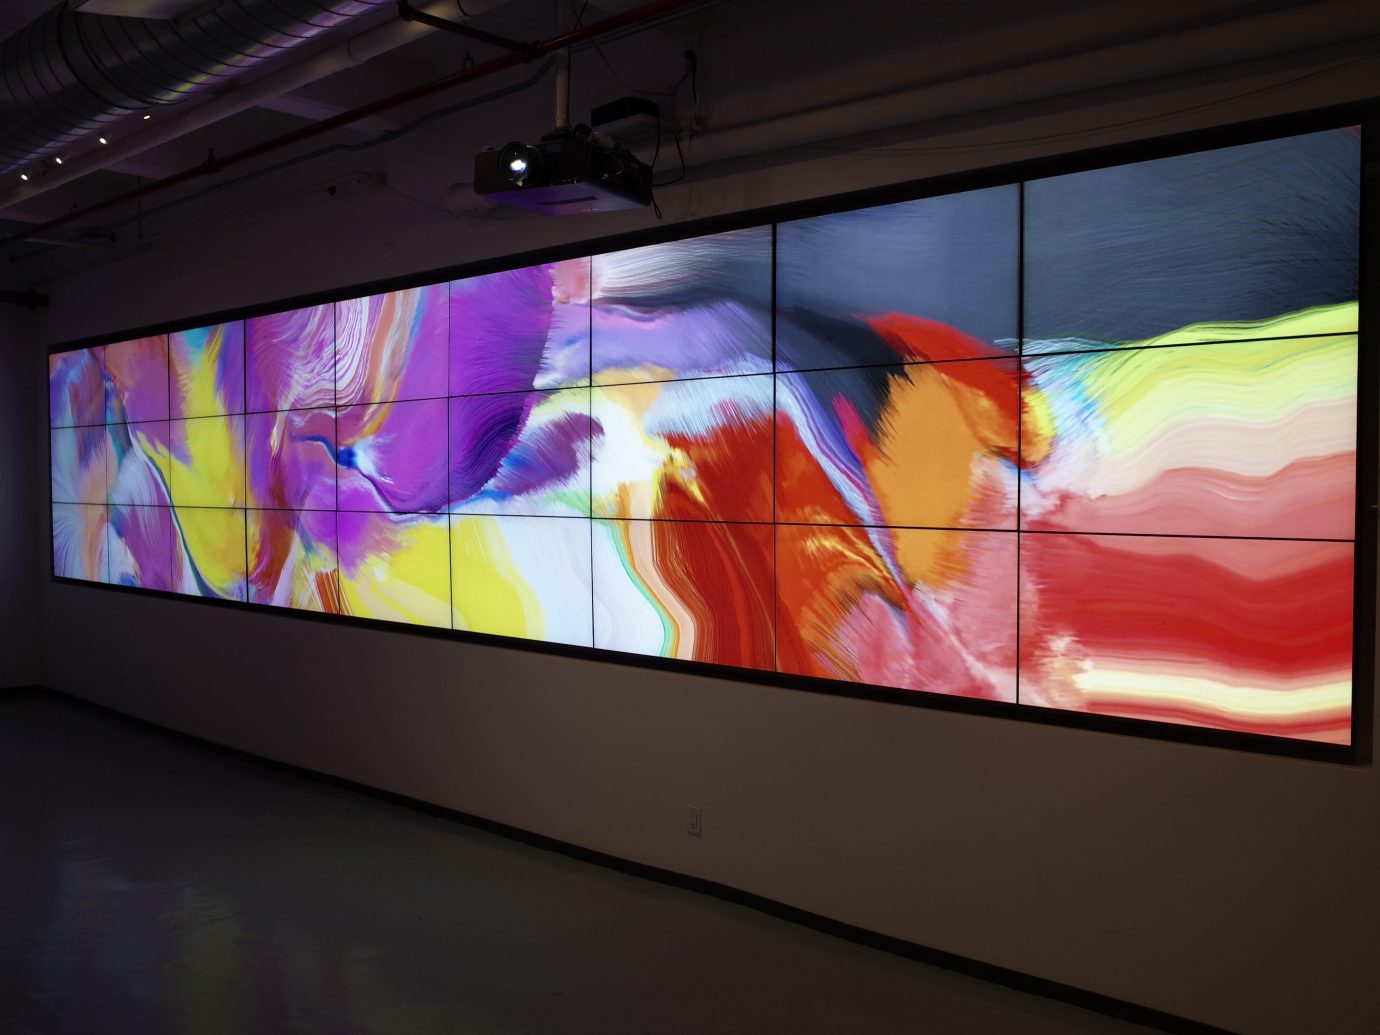 Modern, generative art installation displayed across multiple screens arranged side by side to form a single, large canvas.